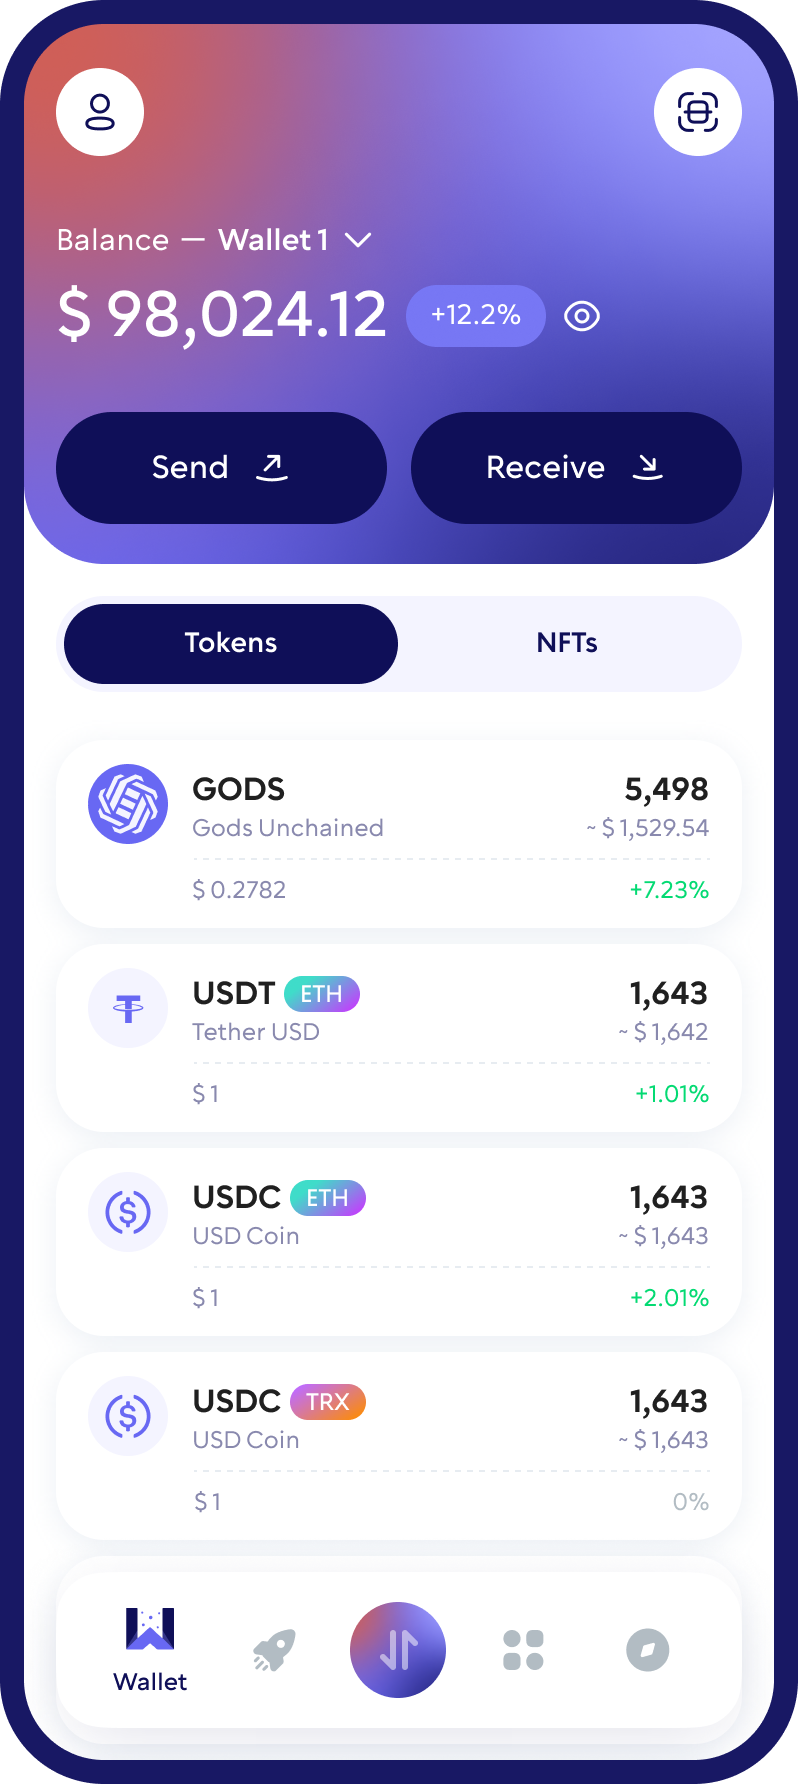 Gods Unchained (GODS) Cryptocurrency Wallet Walletverse